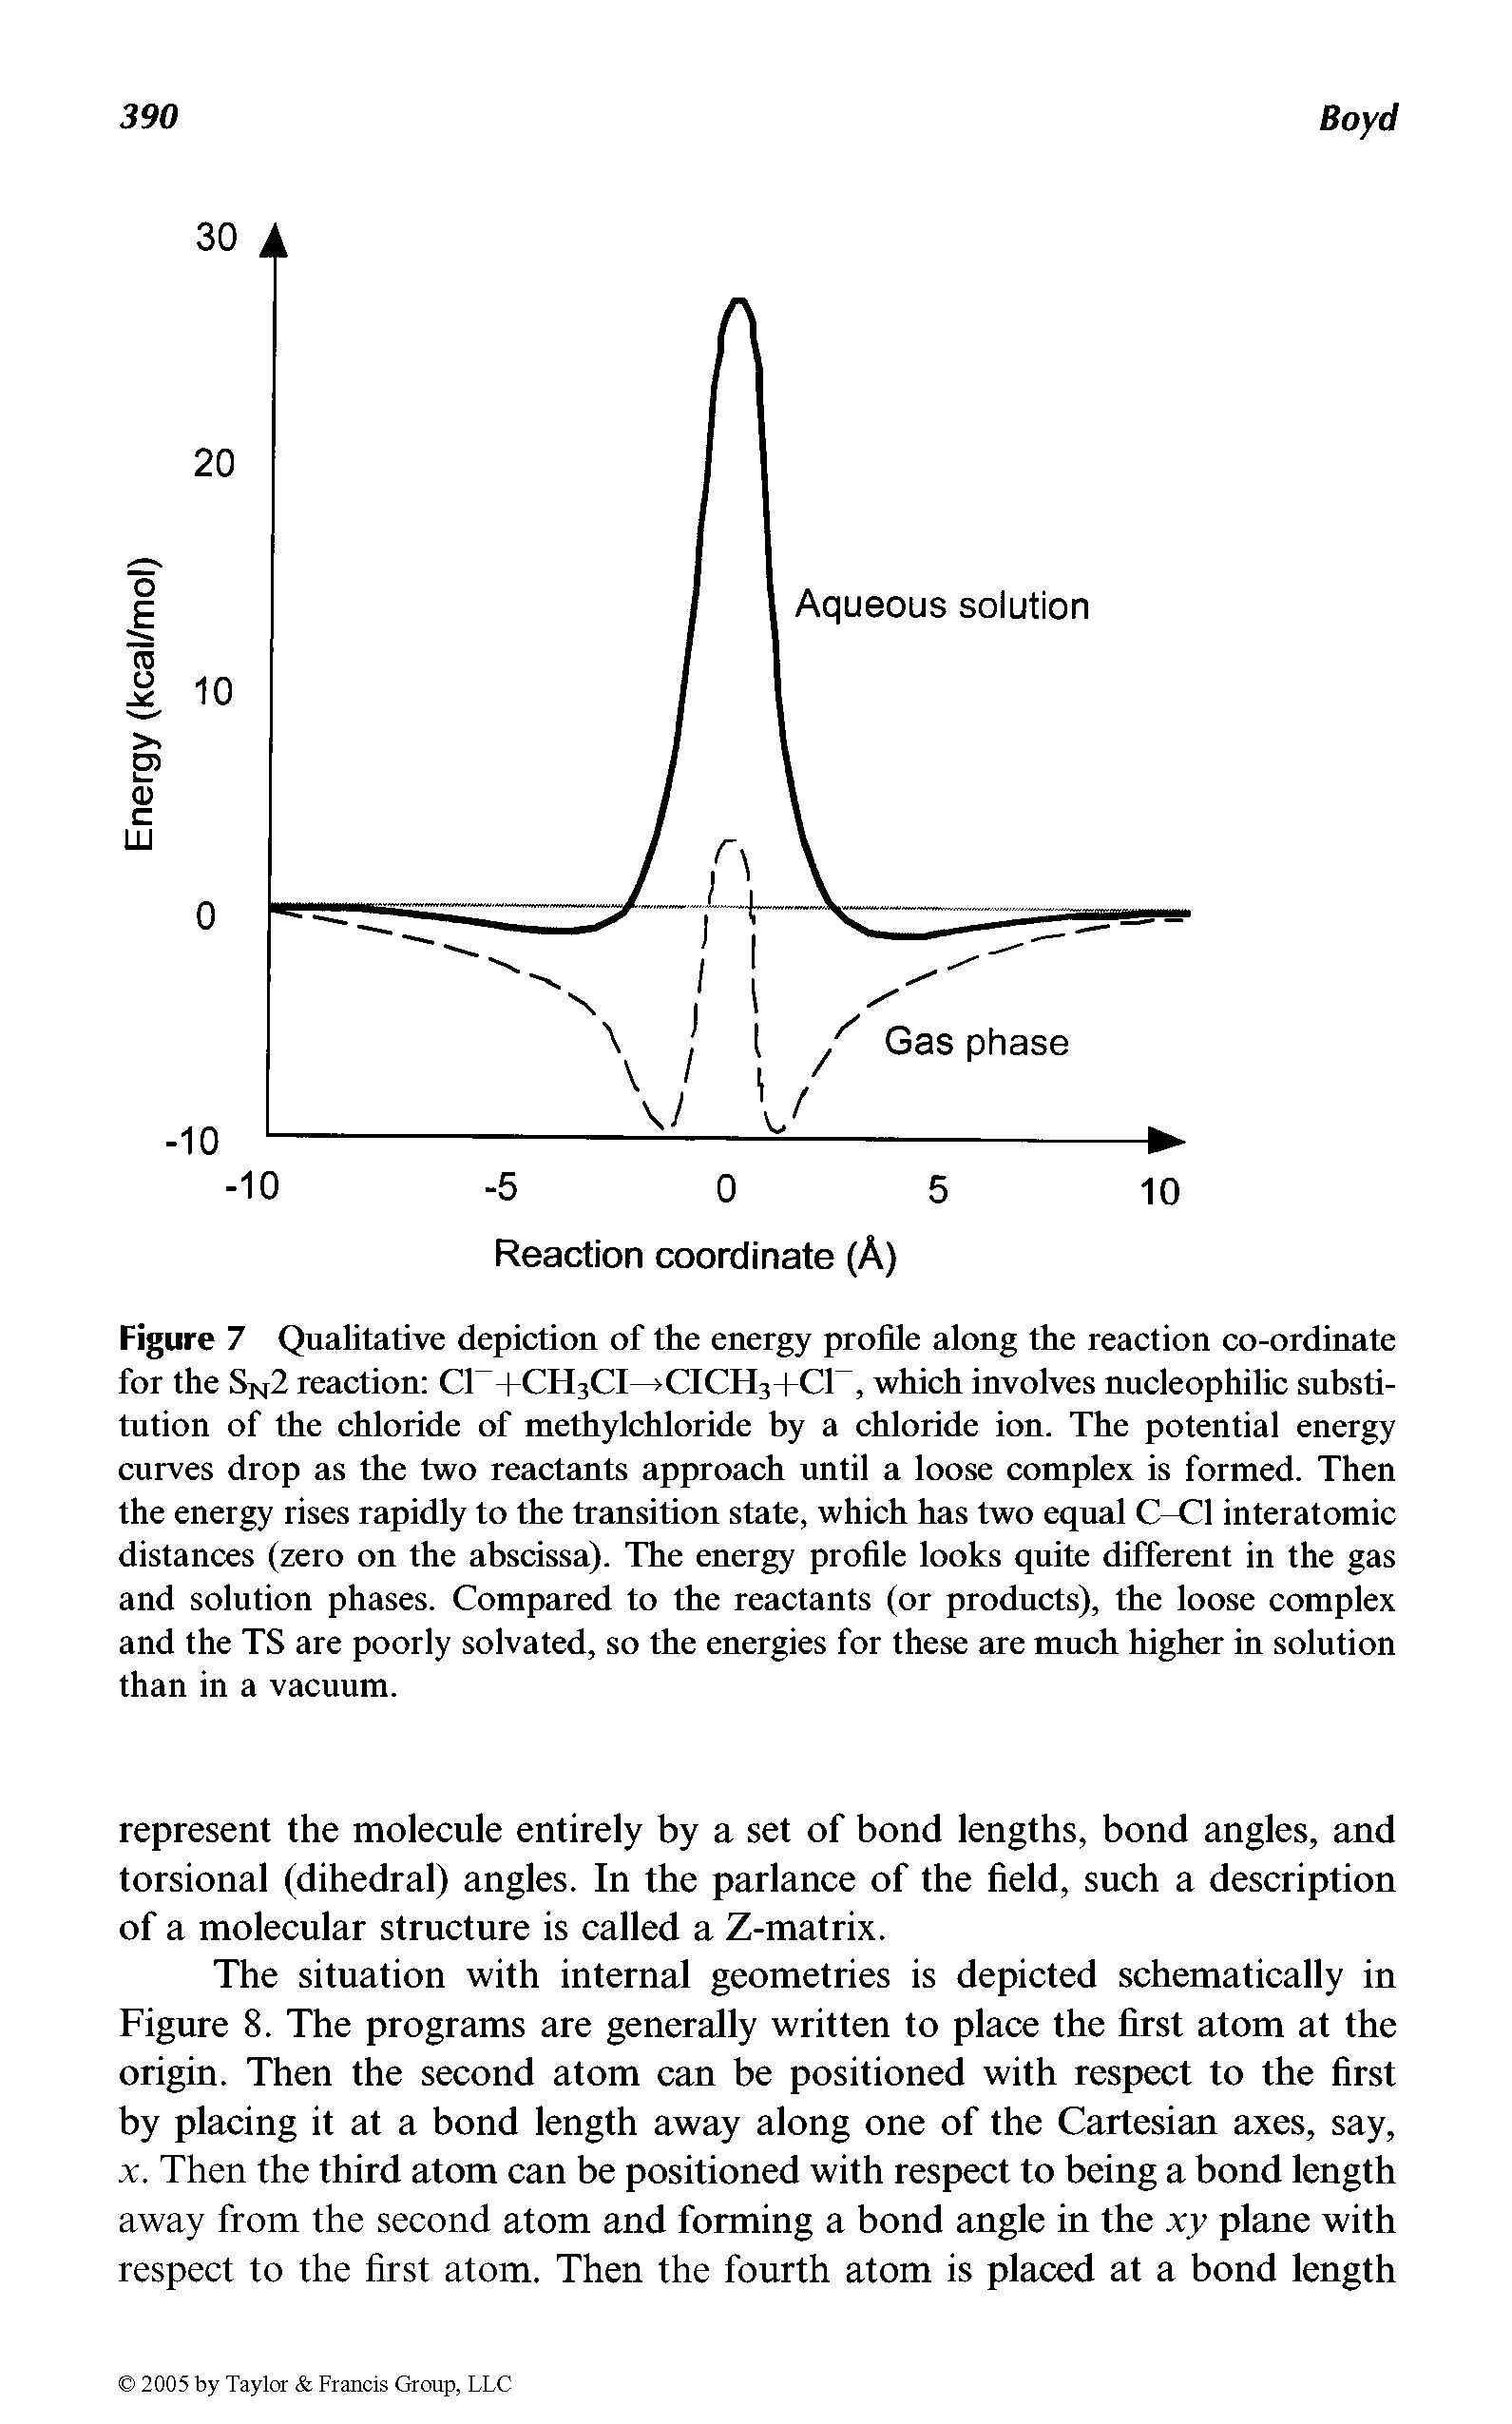 Figure 7 Qualitative depiction of the energy profile along the reaction co-ordinate for the Sn2 reaction Cl ICII3CI >CICn3 I Cl, which involves nucleophilic substitution of the chloride of methylchloride by a chloride ion. The potential energy curves drop as the two reactants approach until a loose complex is formed. Then the energy rises rapidly to the transition state, which has two equal C-Cl interatomic distances (zero on the abscissa). The energy profile looks quite different in the gas and solution phases. Compared to the reactants (or products), the loose complex and the TS are poorly solvated, so the energies for these are much higher in solution than in a vacuum.